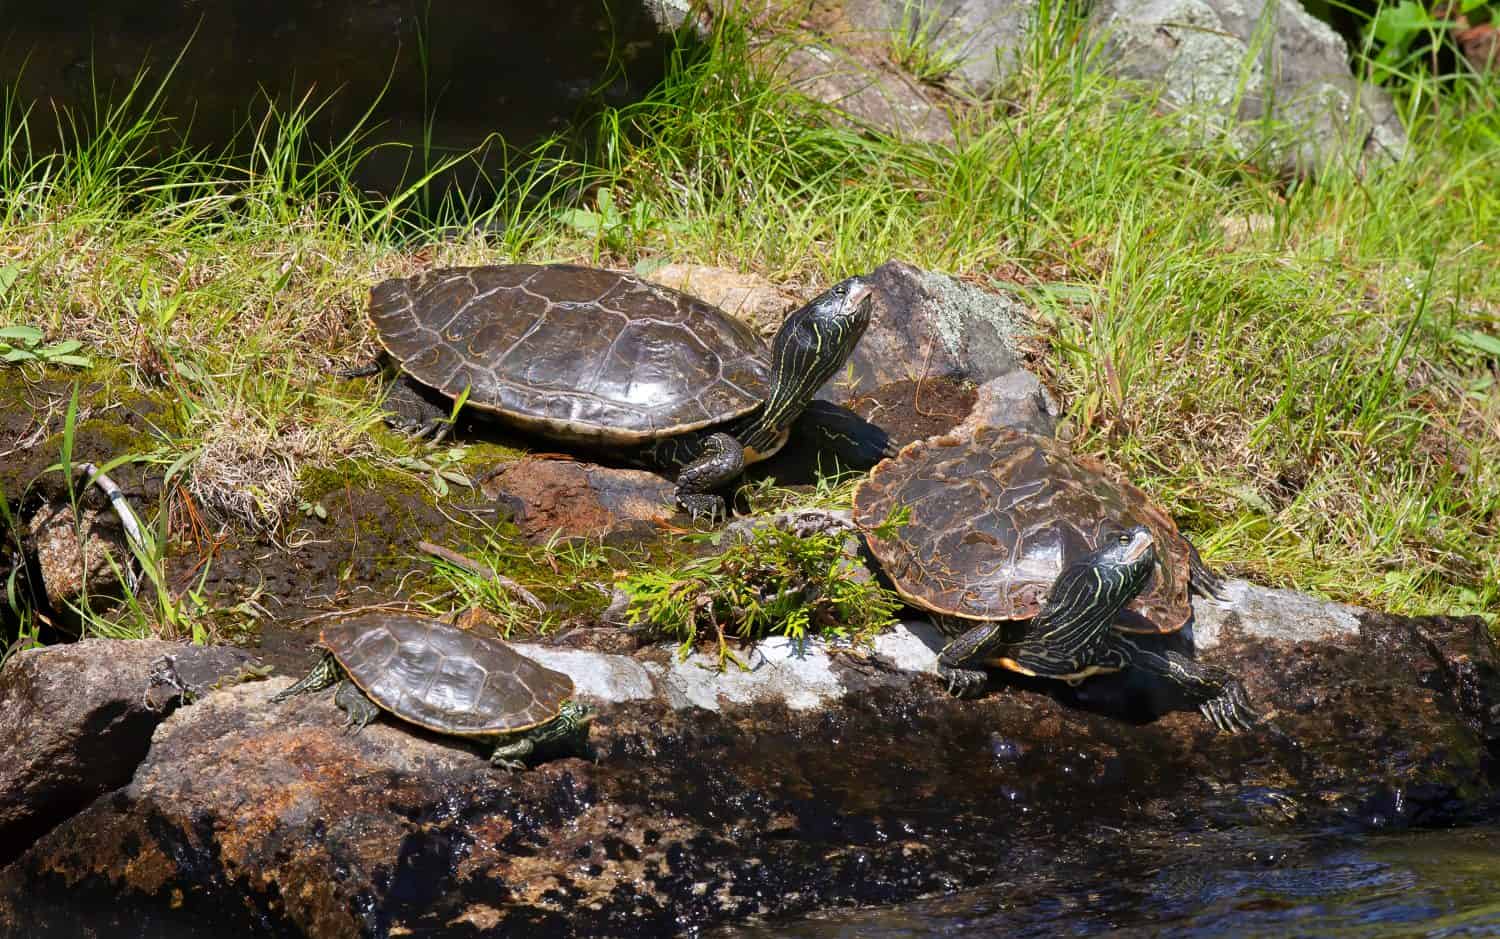 Northern Map Turtles resting on a rock in the sunshine on Buck Lake, Ontario, Canada